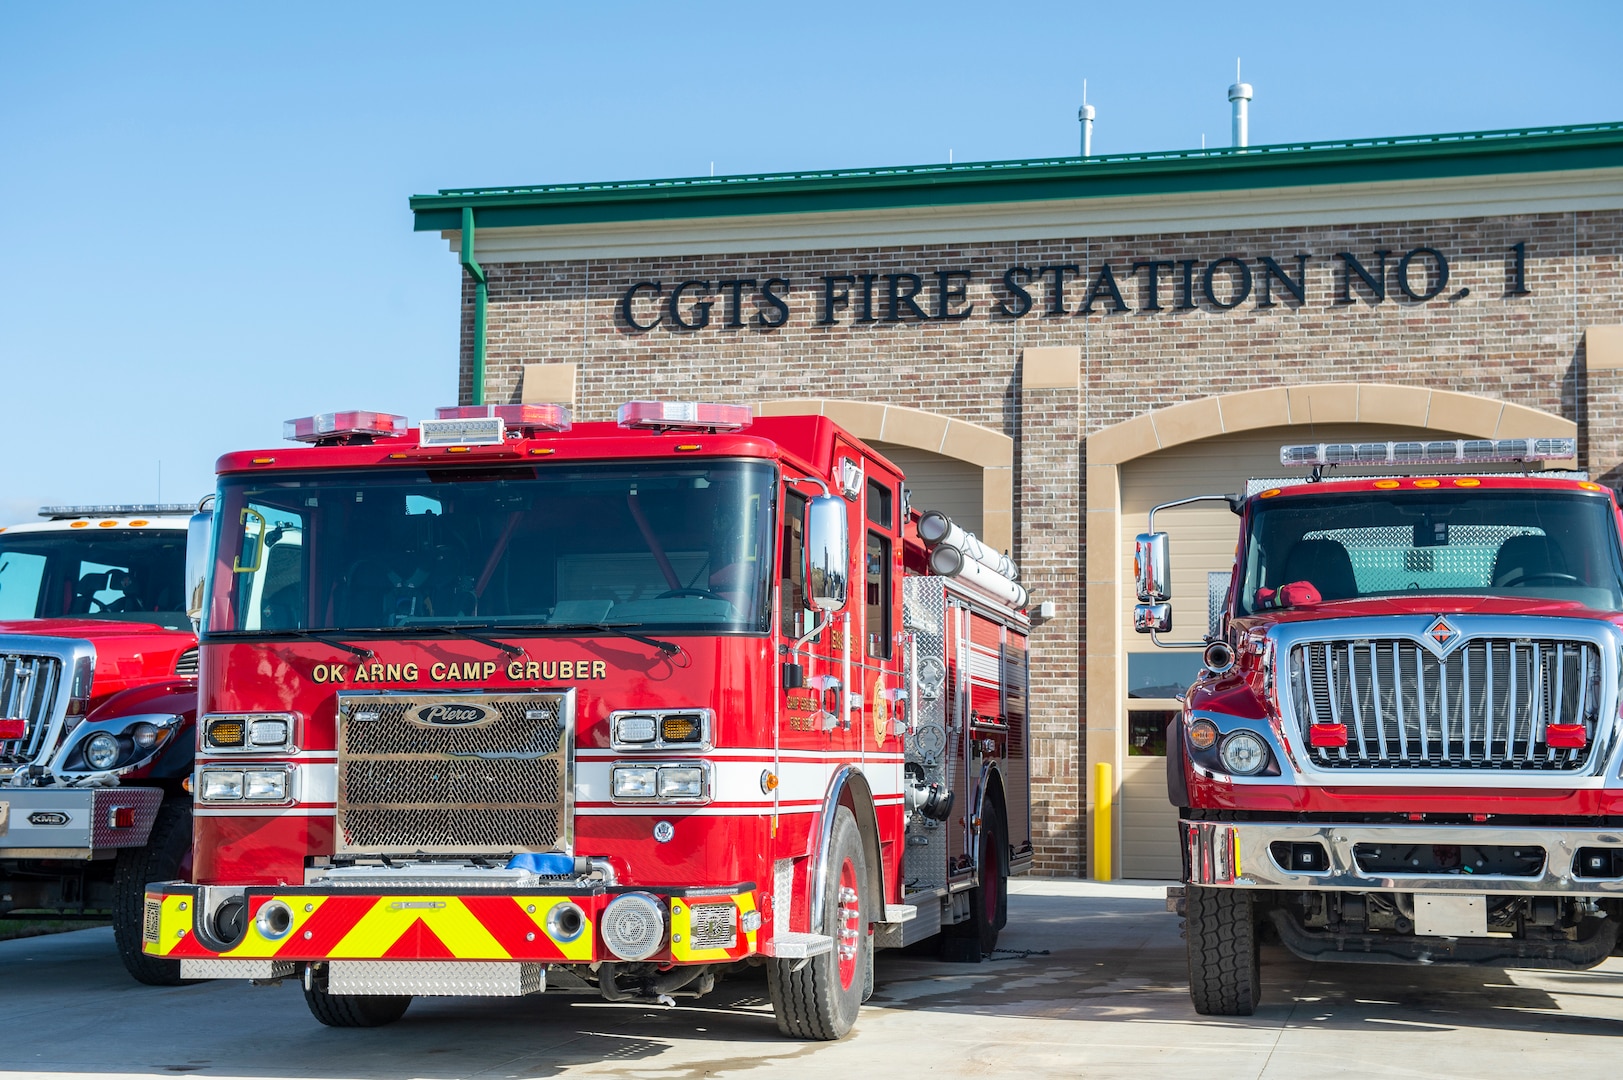 Fire trucks assigned to the newly opened Fire Station Number 1 sit parked outside the station prior to a ribbon cutting at Camp Gruber Training Center, March 24, 2021. (Oklahoma Army National Guard photo by Anthony Jones)